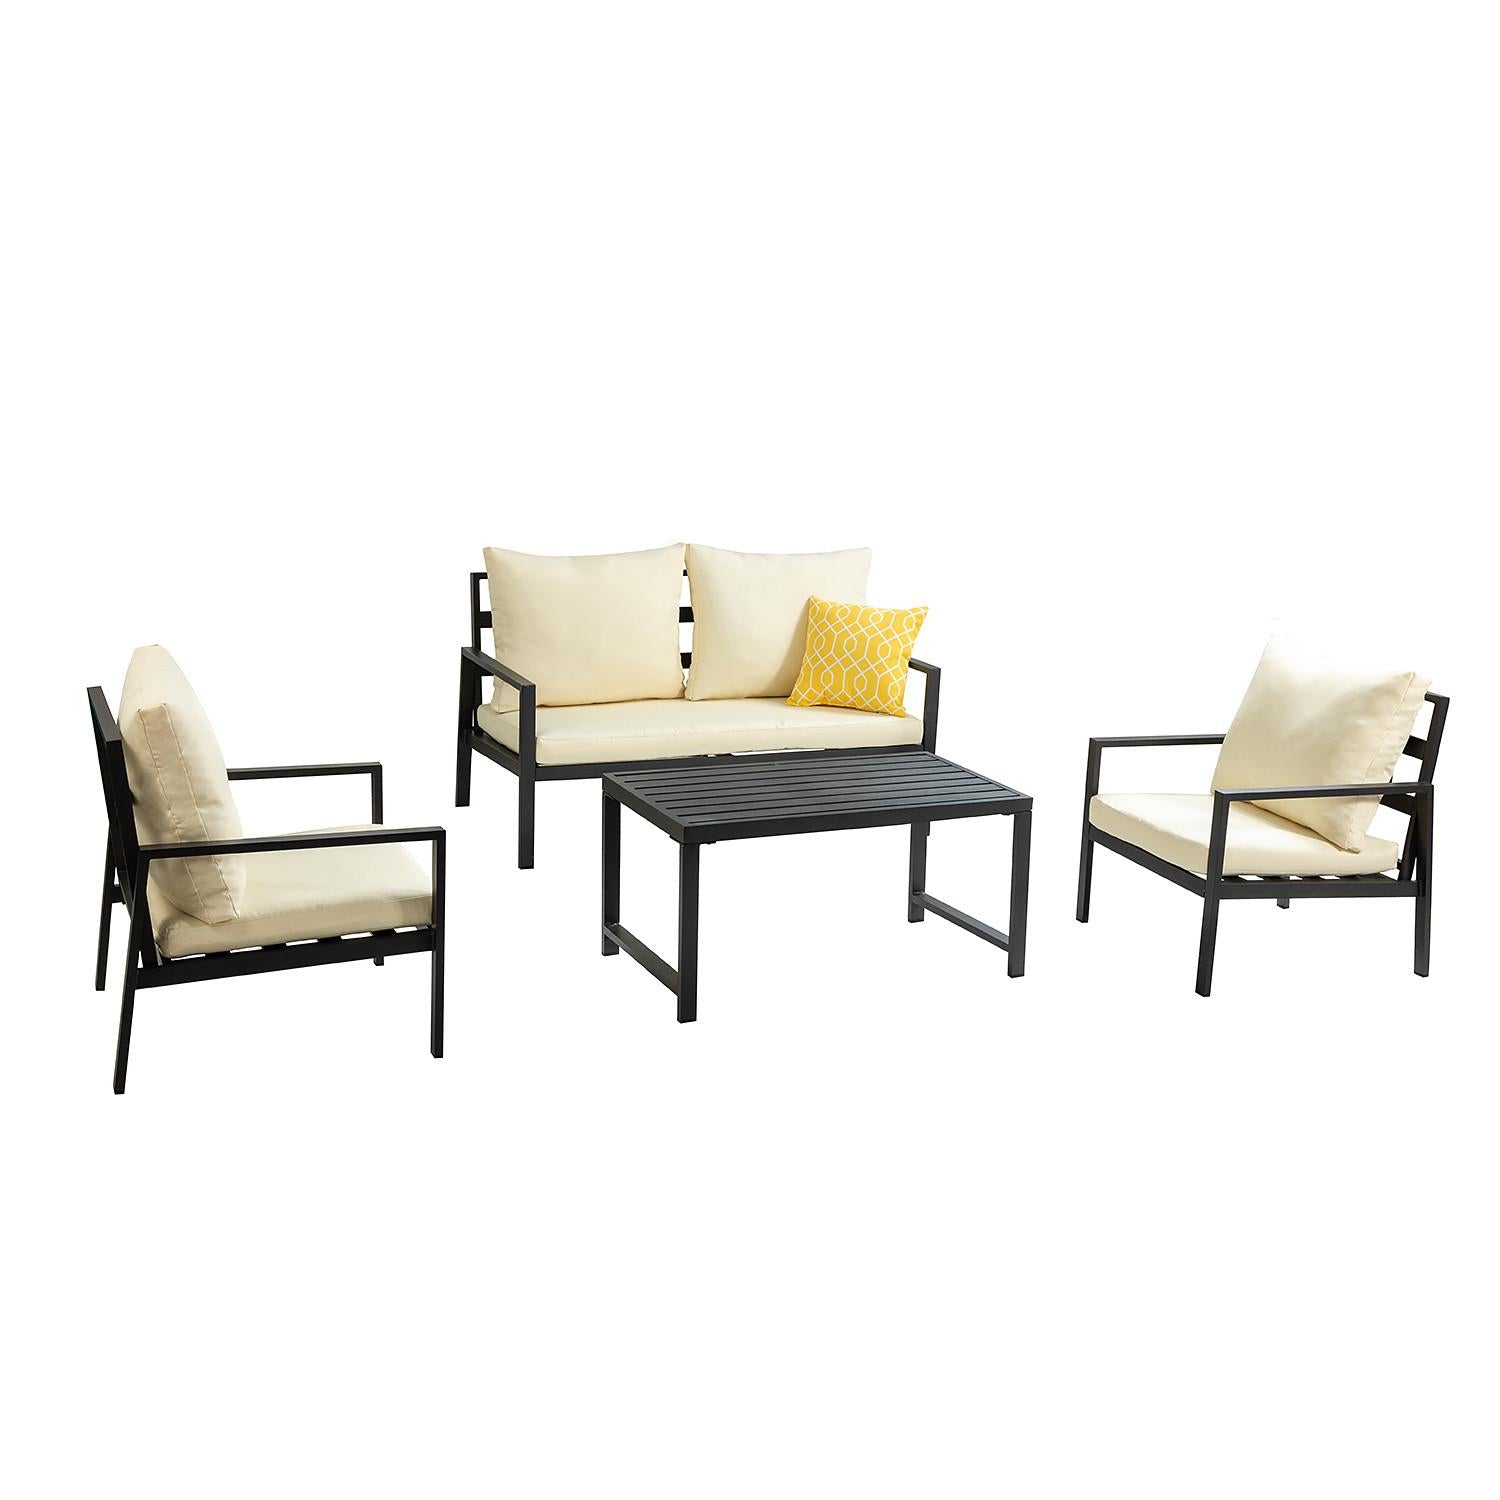 Black Lines and Ivory Outdoor Sofa Seating and Table Set